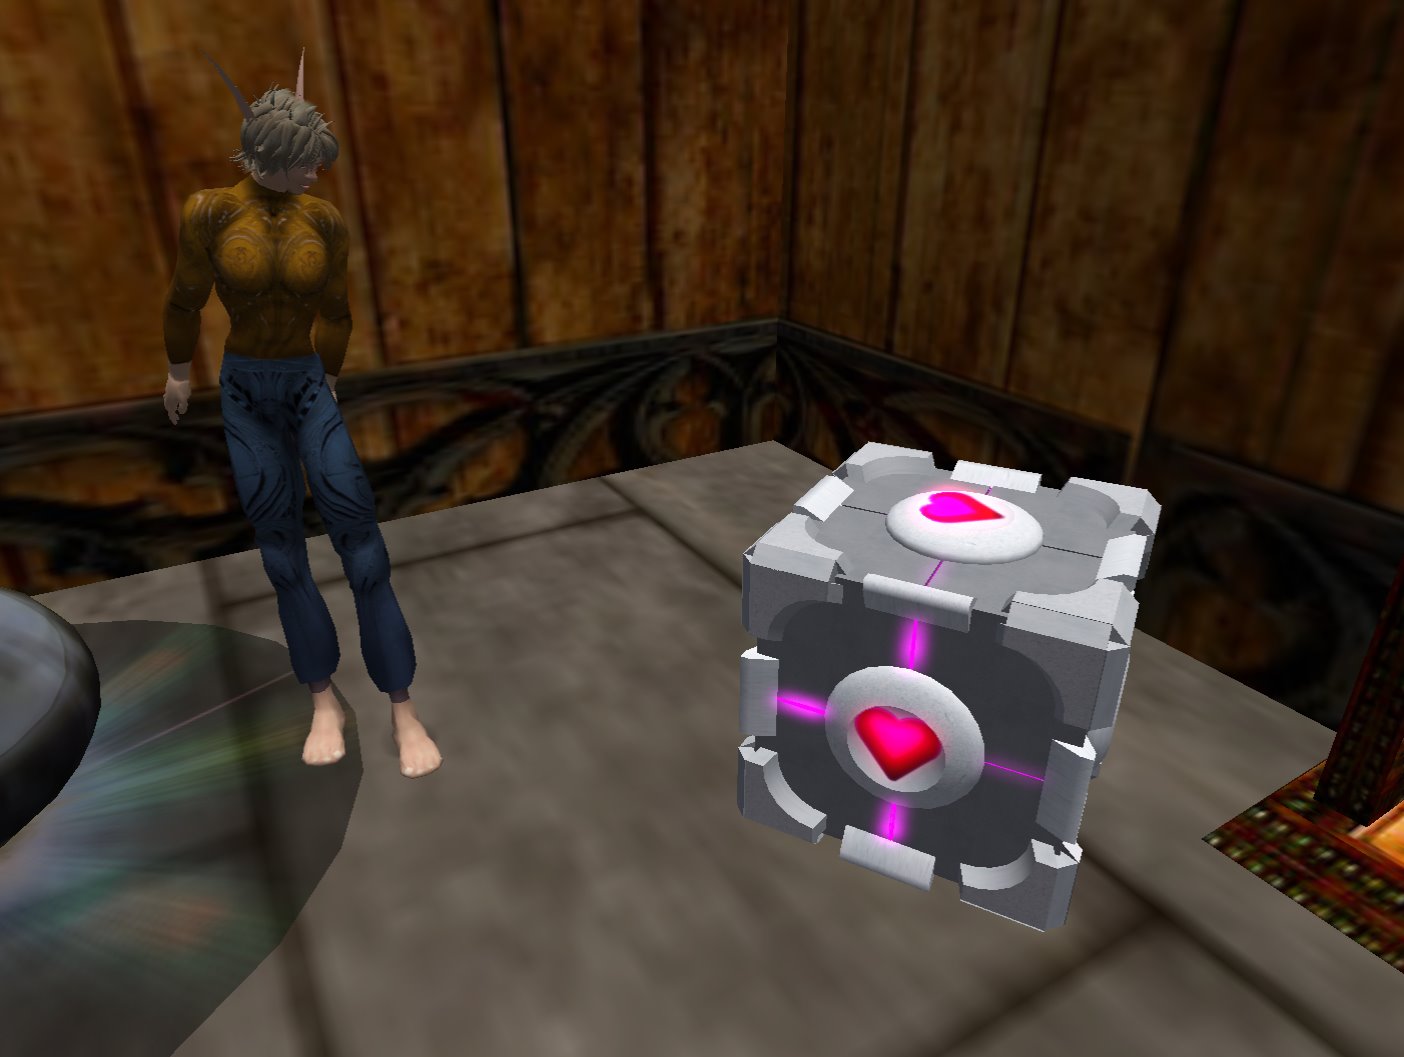 [my+weighted+companion+cube_001.bmp]